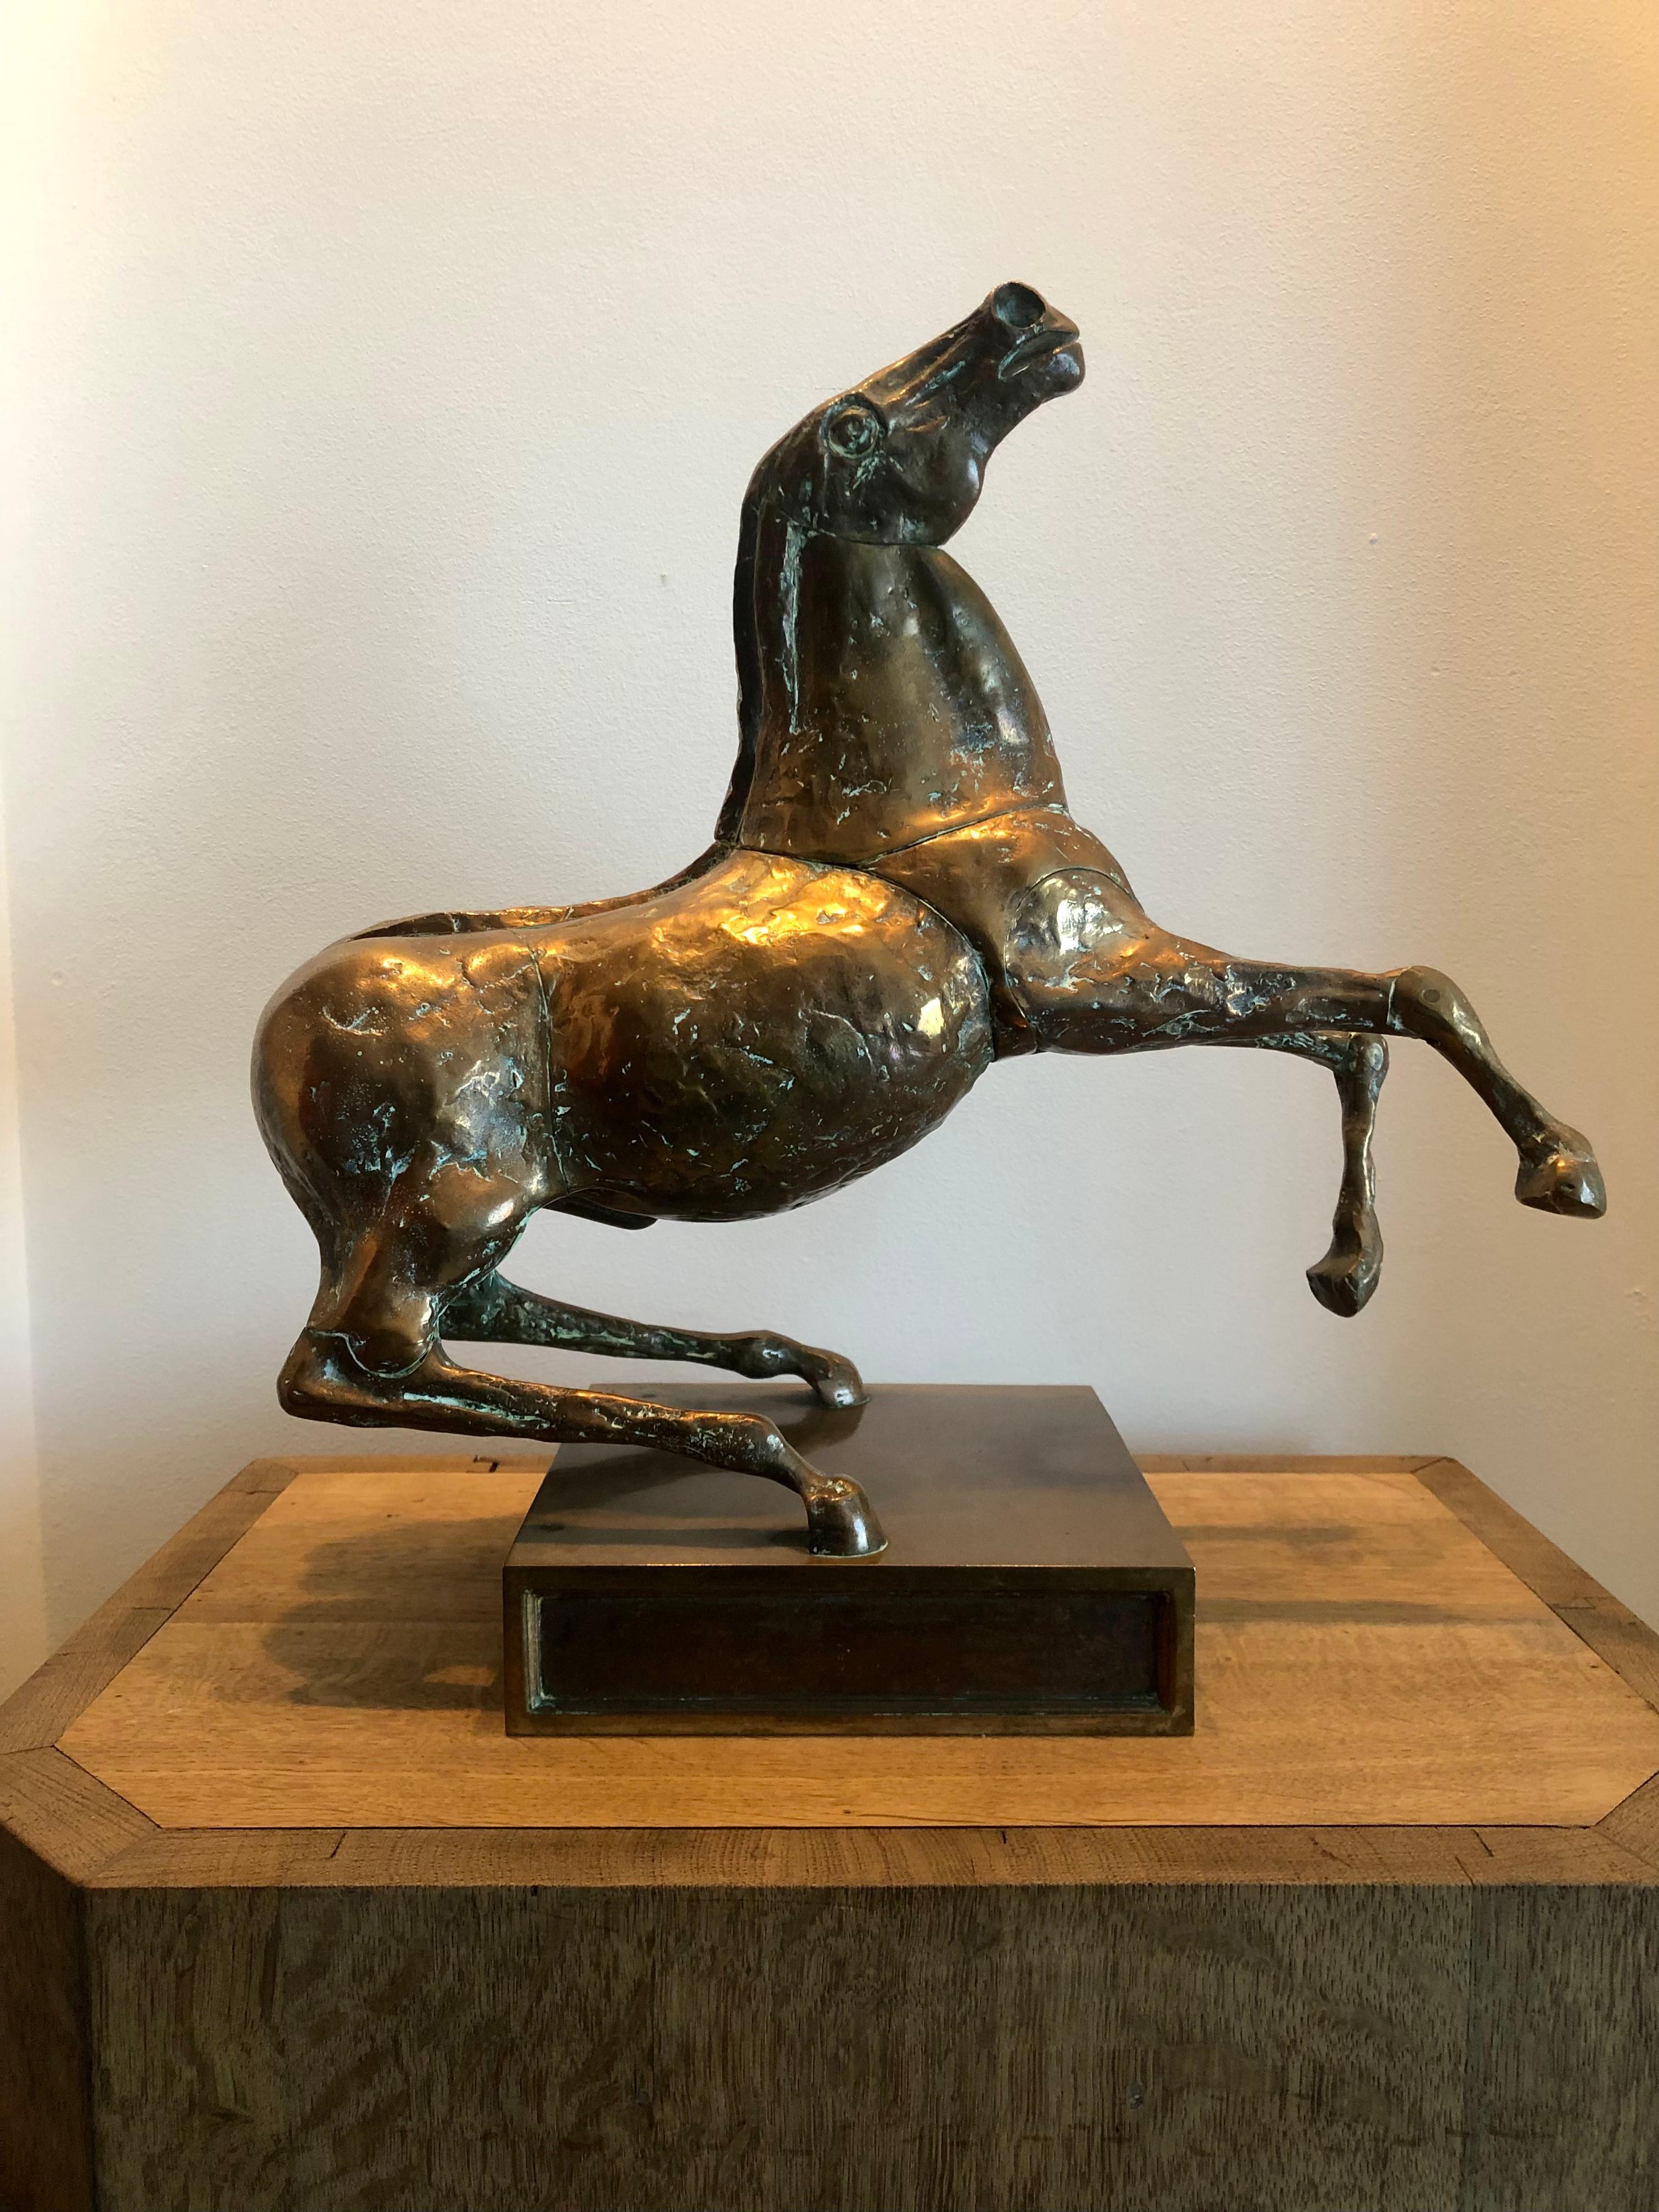 Sculpture of a horse in bronze numbered and signed
Miguel Berrocal.
Good condition with a nice patina.
Good quality of cast.